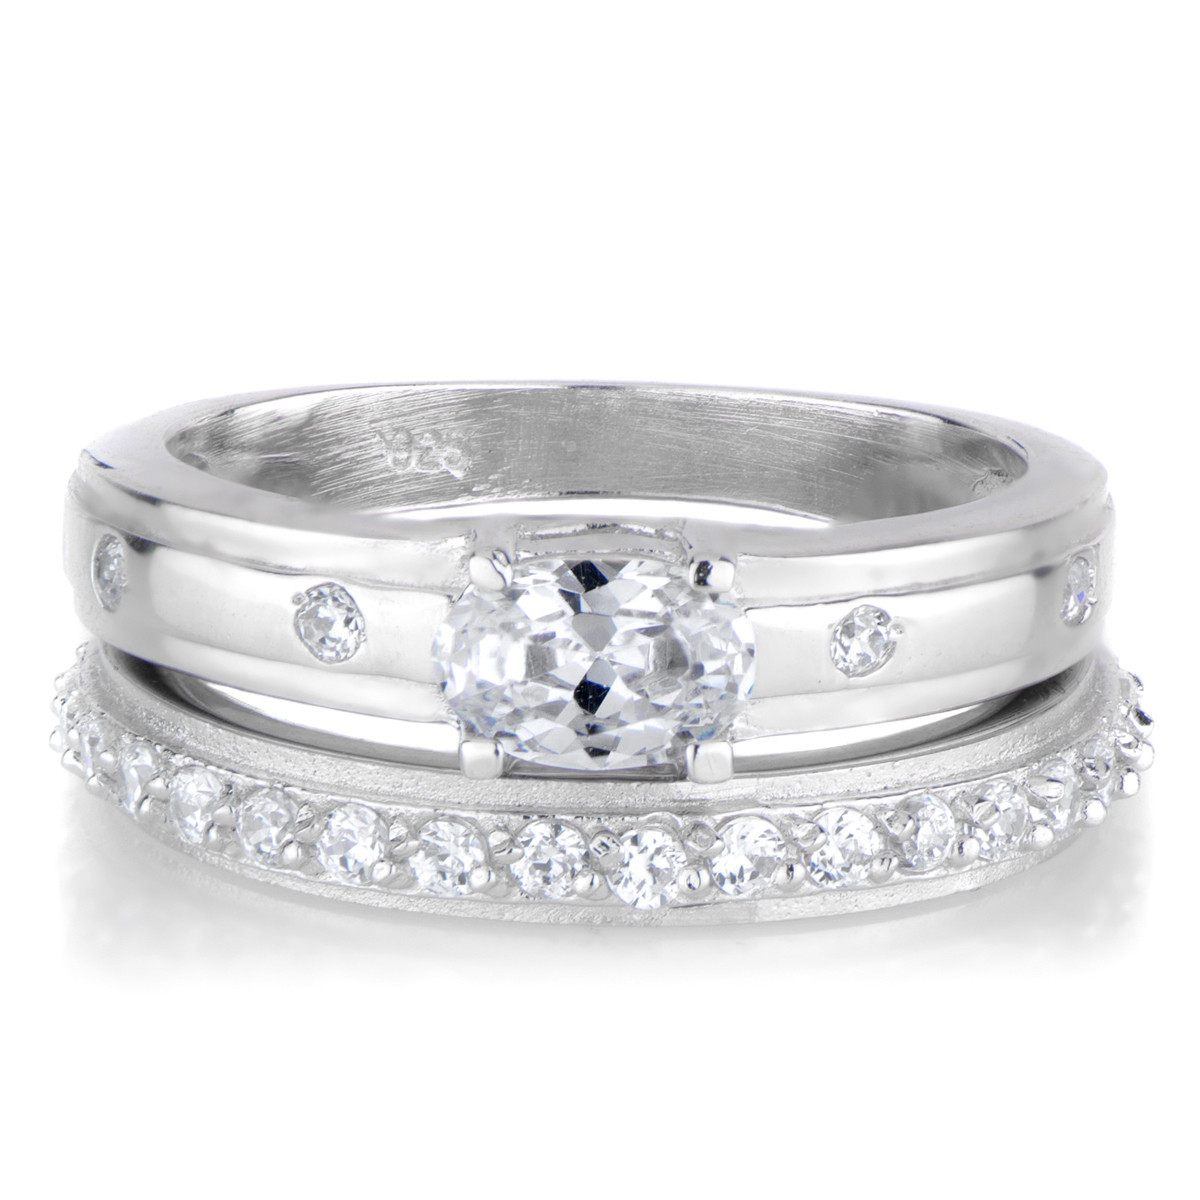 Kay Wedding Rings Sets
 The Best Kay Jewelers Wedding Ring Sets – Home Family